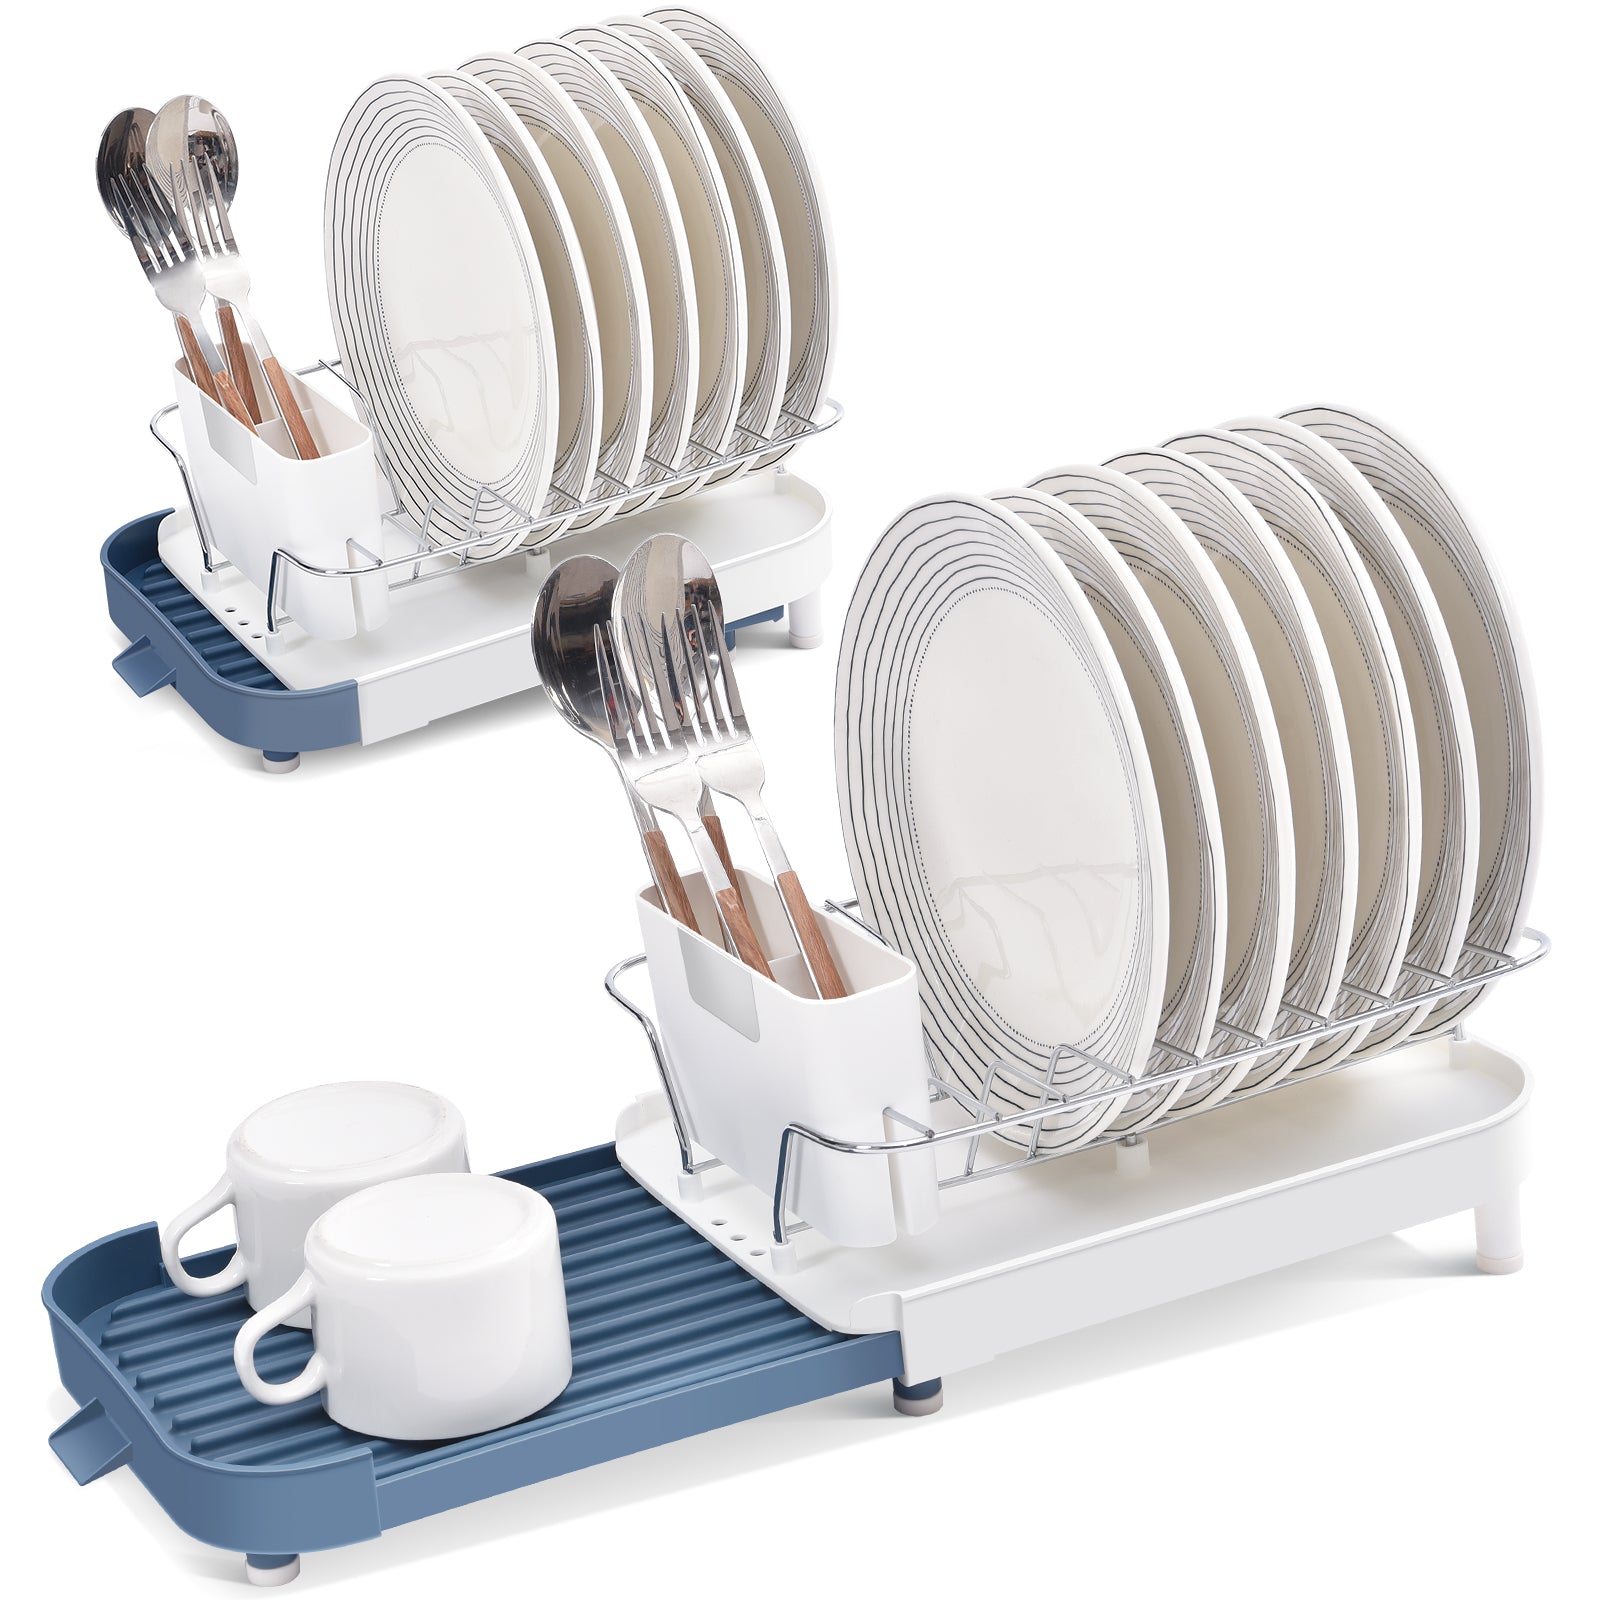 Kingrack Expandable Dish Drying Rack, Small Dish Drainer Rack for Kitchen  Counter Organizers, Stainless Steel, Non-Slip Feet, Anti Rust Sink Plate  Rack 